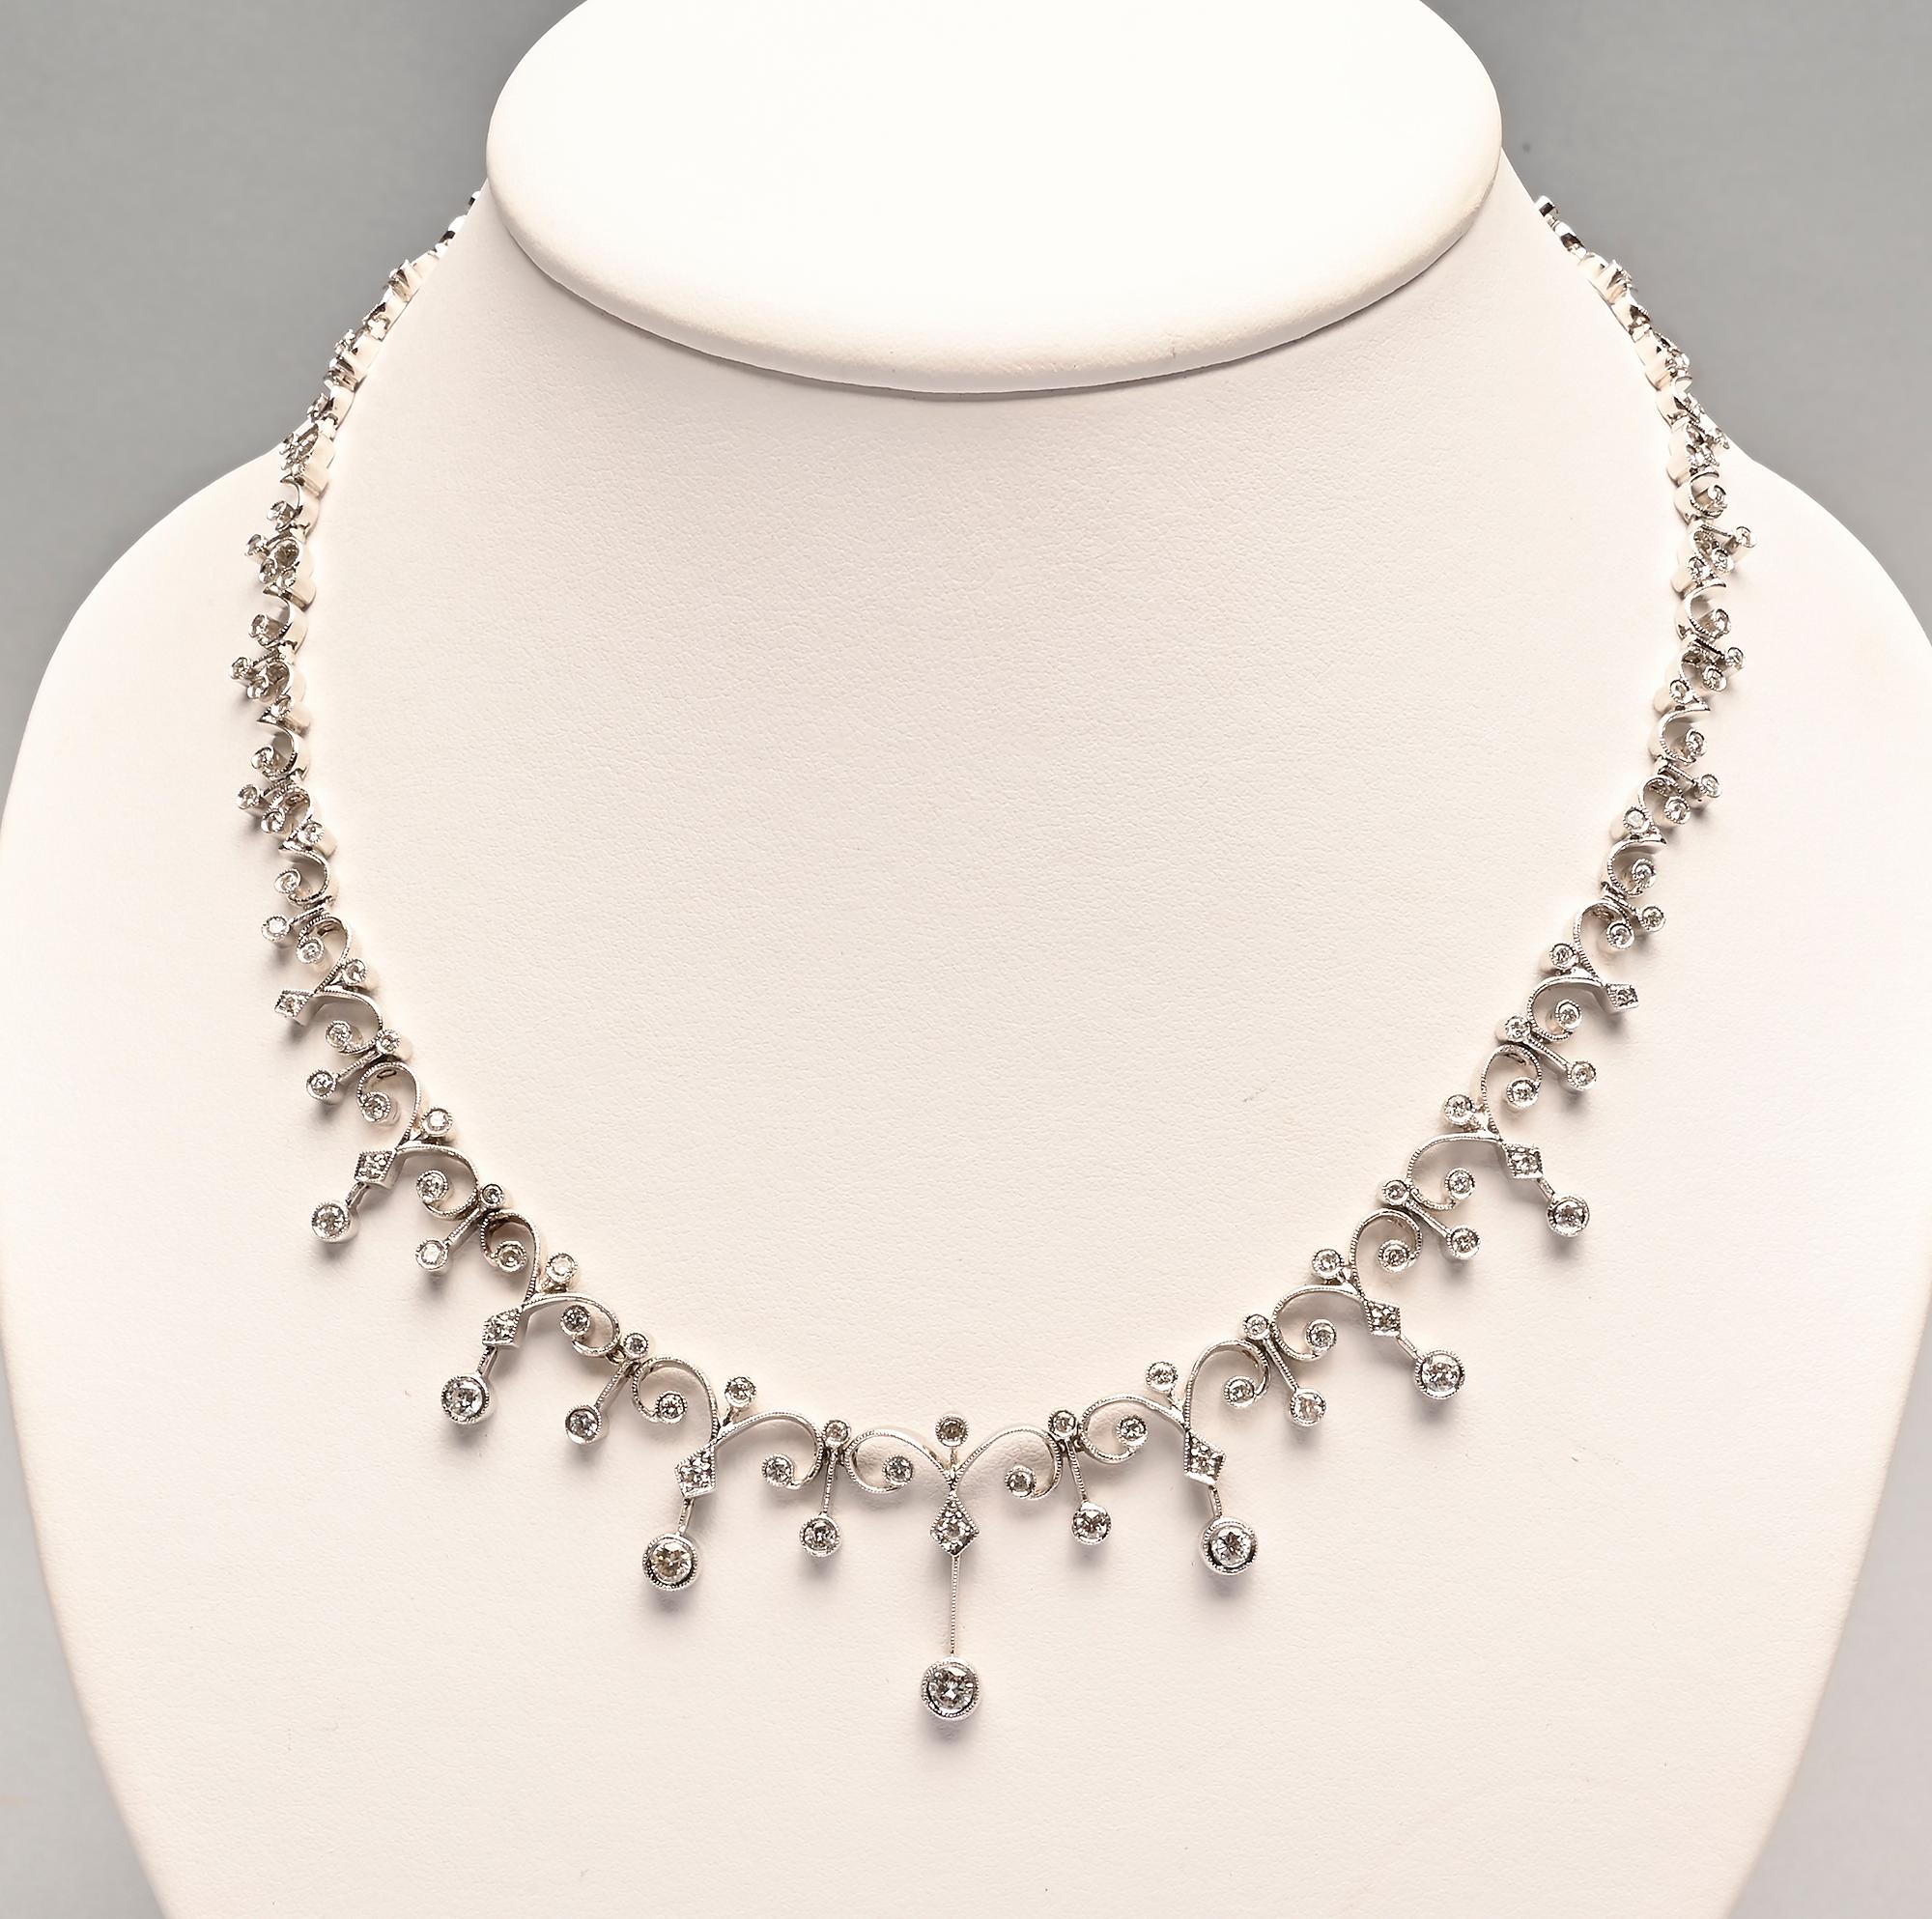 Delicate and graceful diamond necklace with curved links much like a fleur de lis. The central links have graduated pendants. The necklace is 18.5 inches long; made of 18 karat white gold.
Truly a stunning piece of artistry.